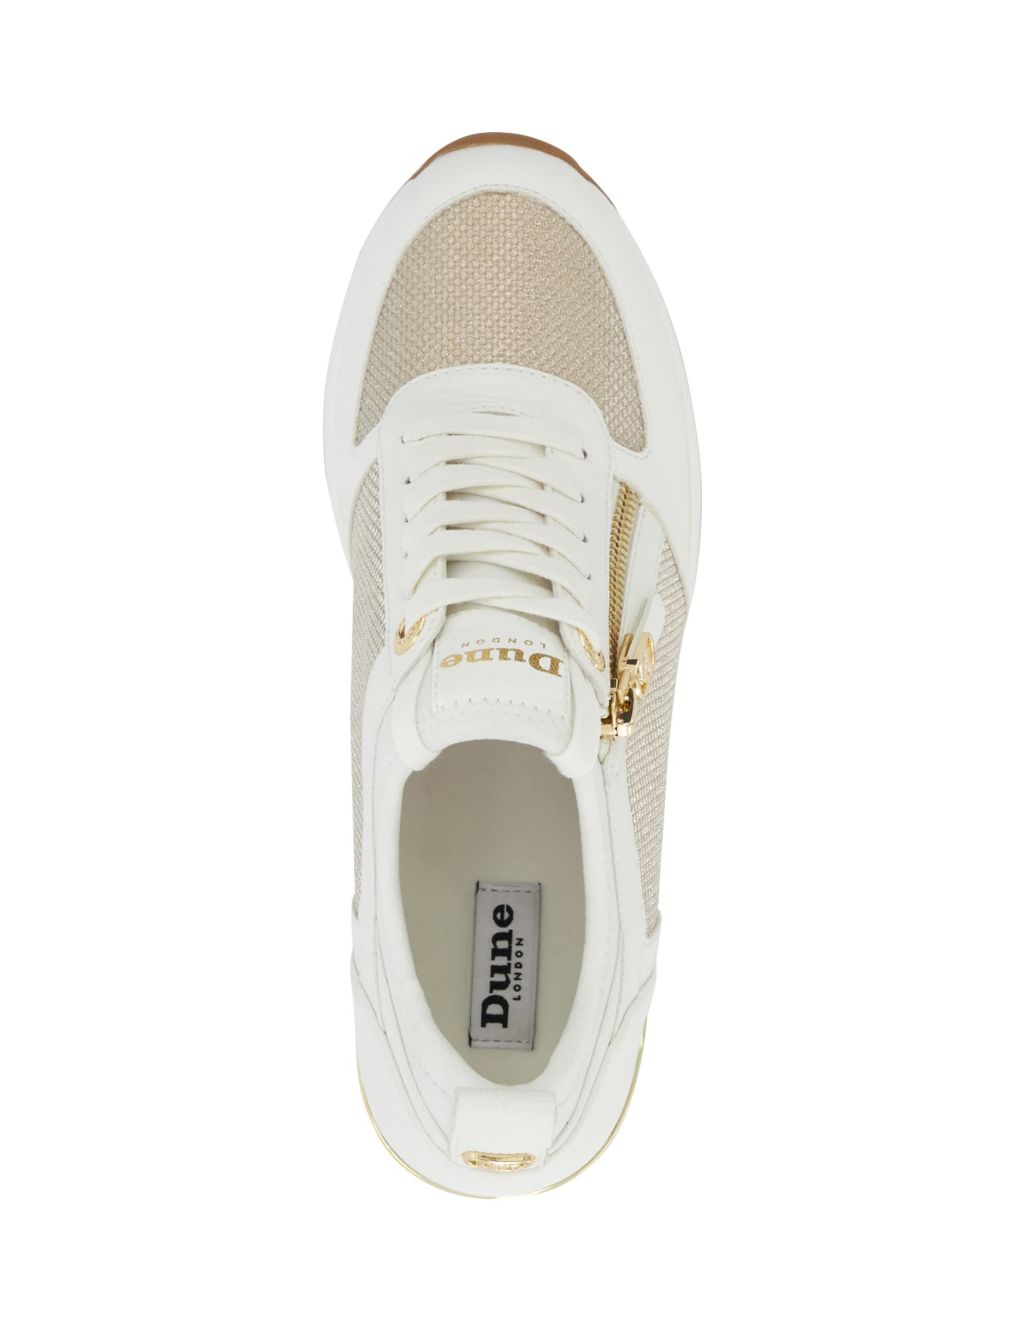 Leather Lace Up Side Detail Wedge Trainers image 4